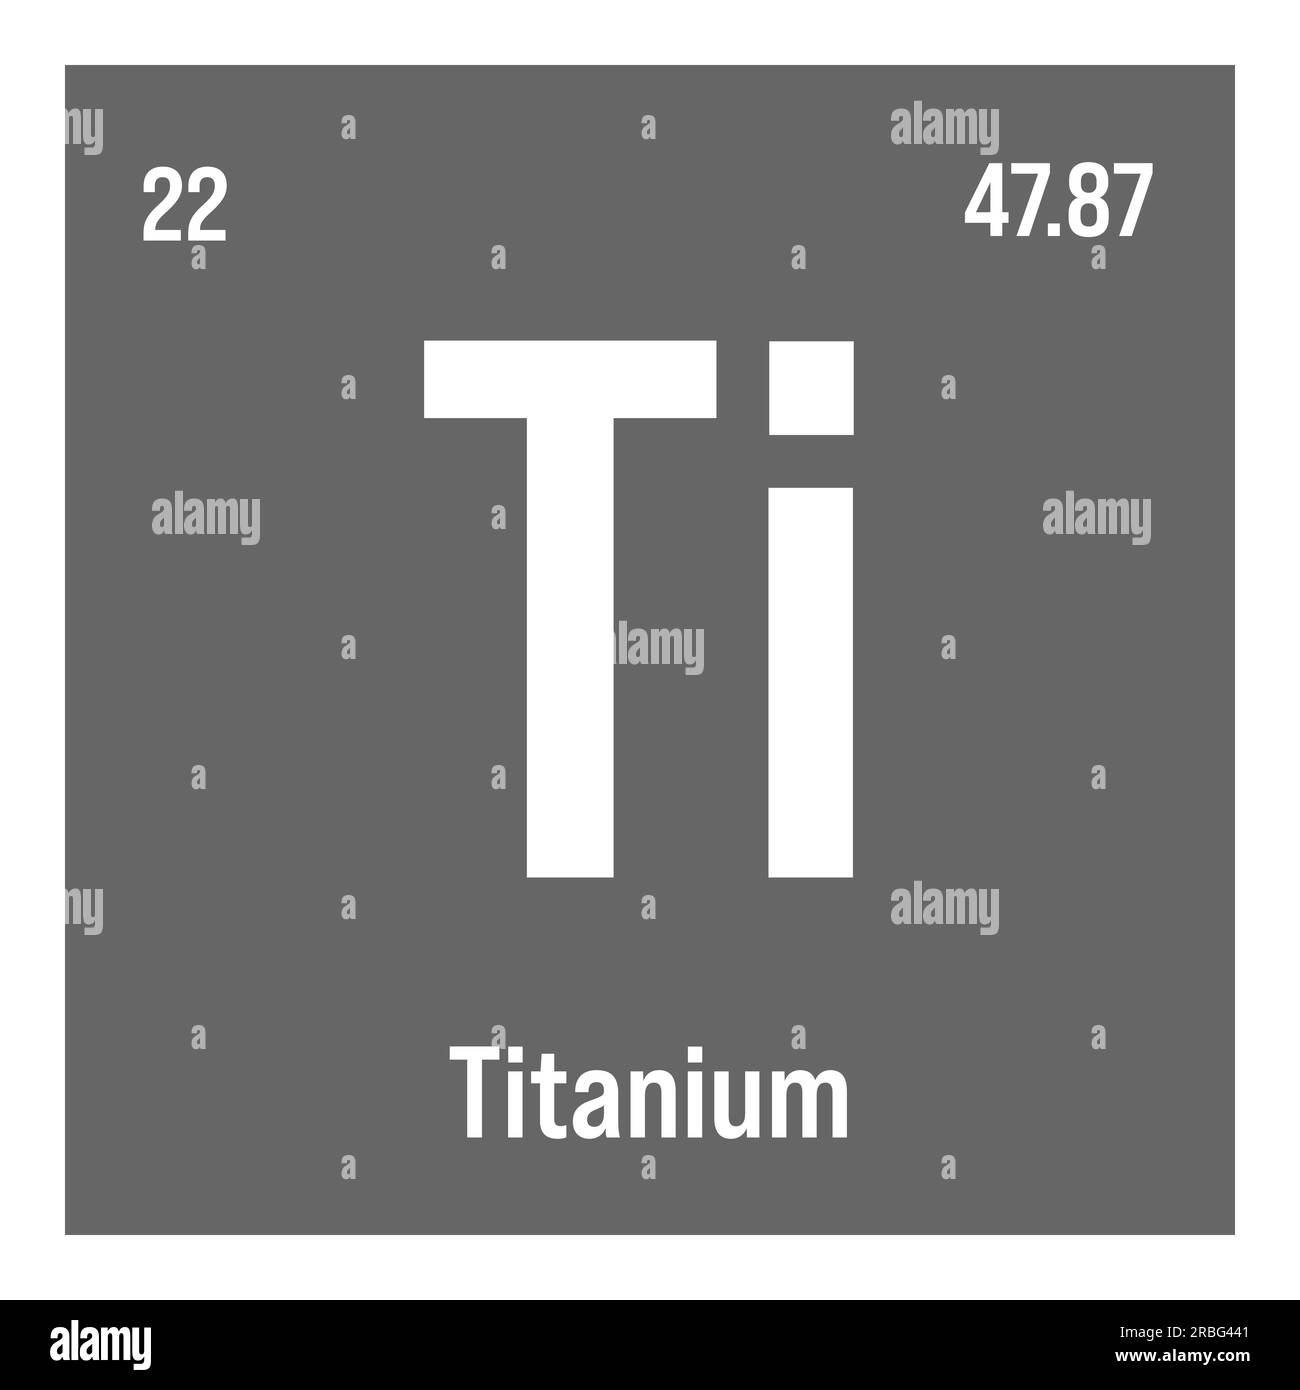 Titanium, Ti, periodic table element with name, symbol, atomic number and weight. Transition metal with various industrial uses, such as in aerospace, medical implants, and as a component in certain types of alloys. Stock Vector